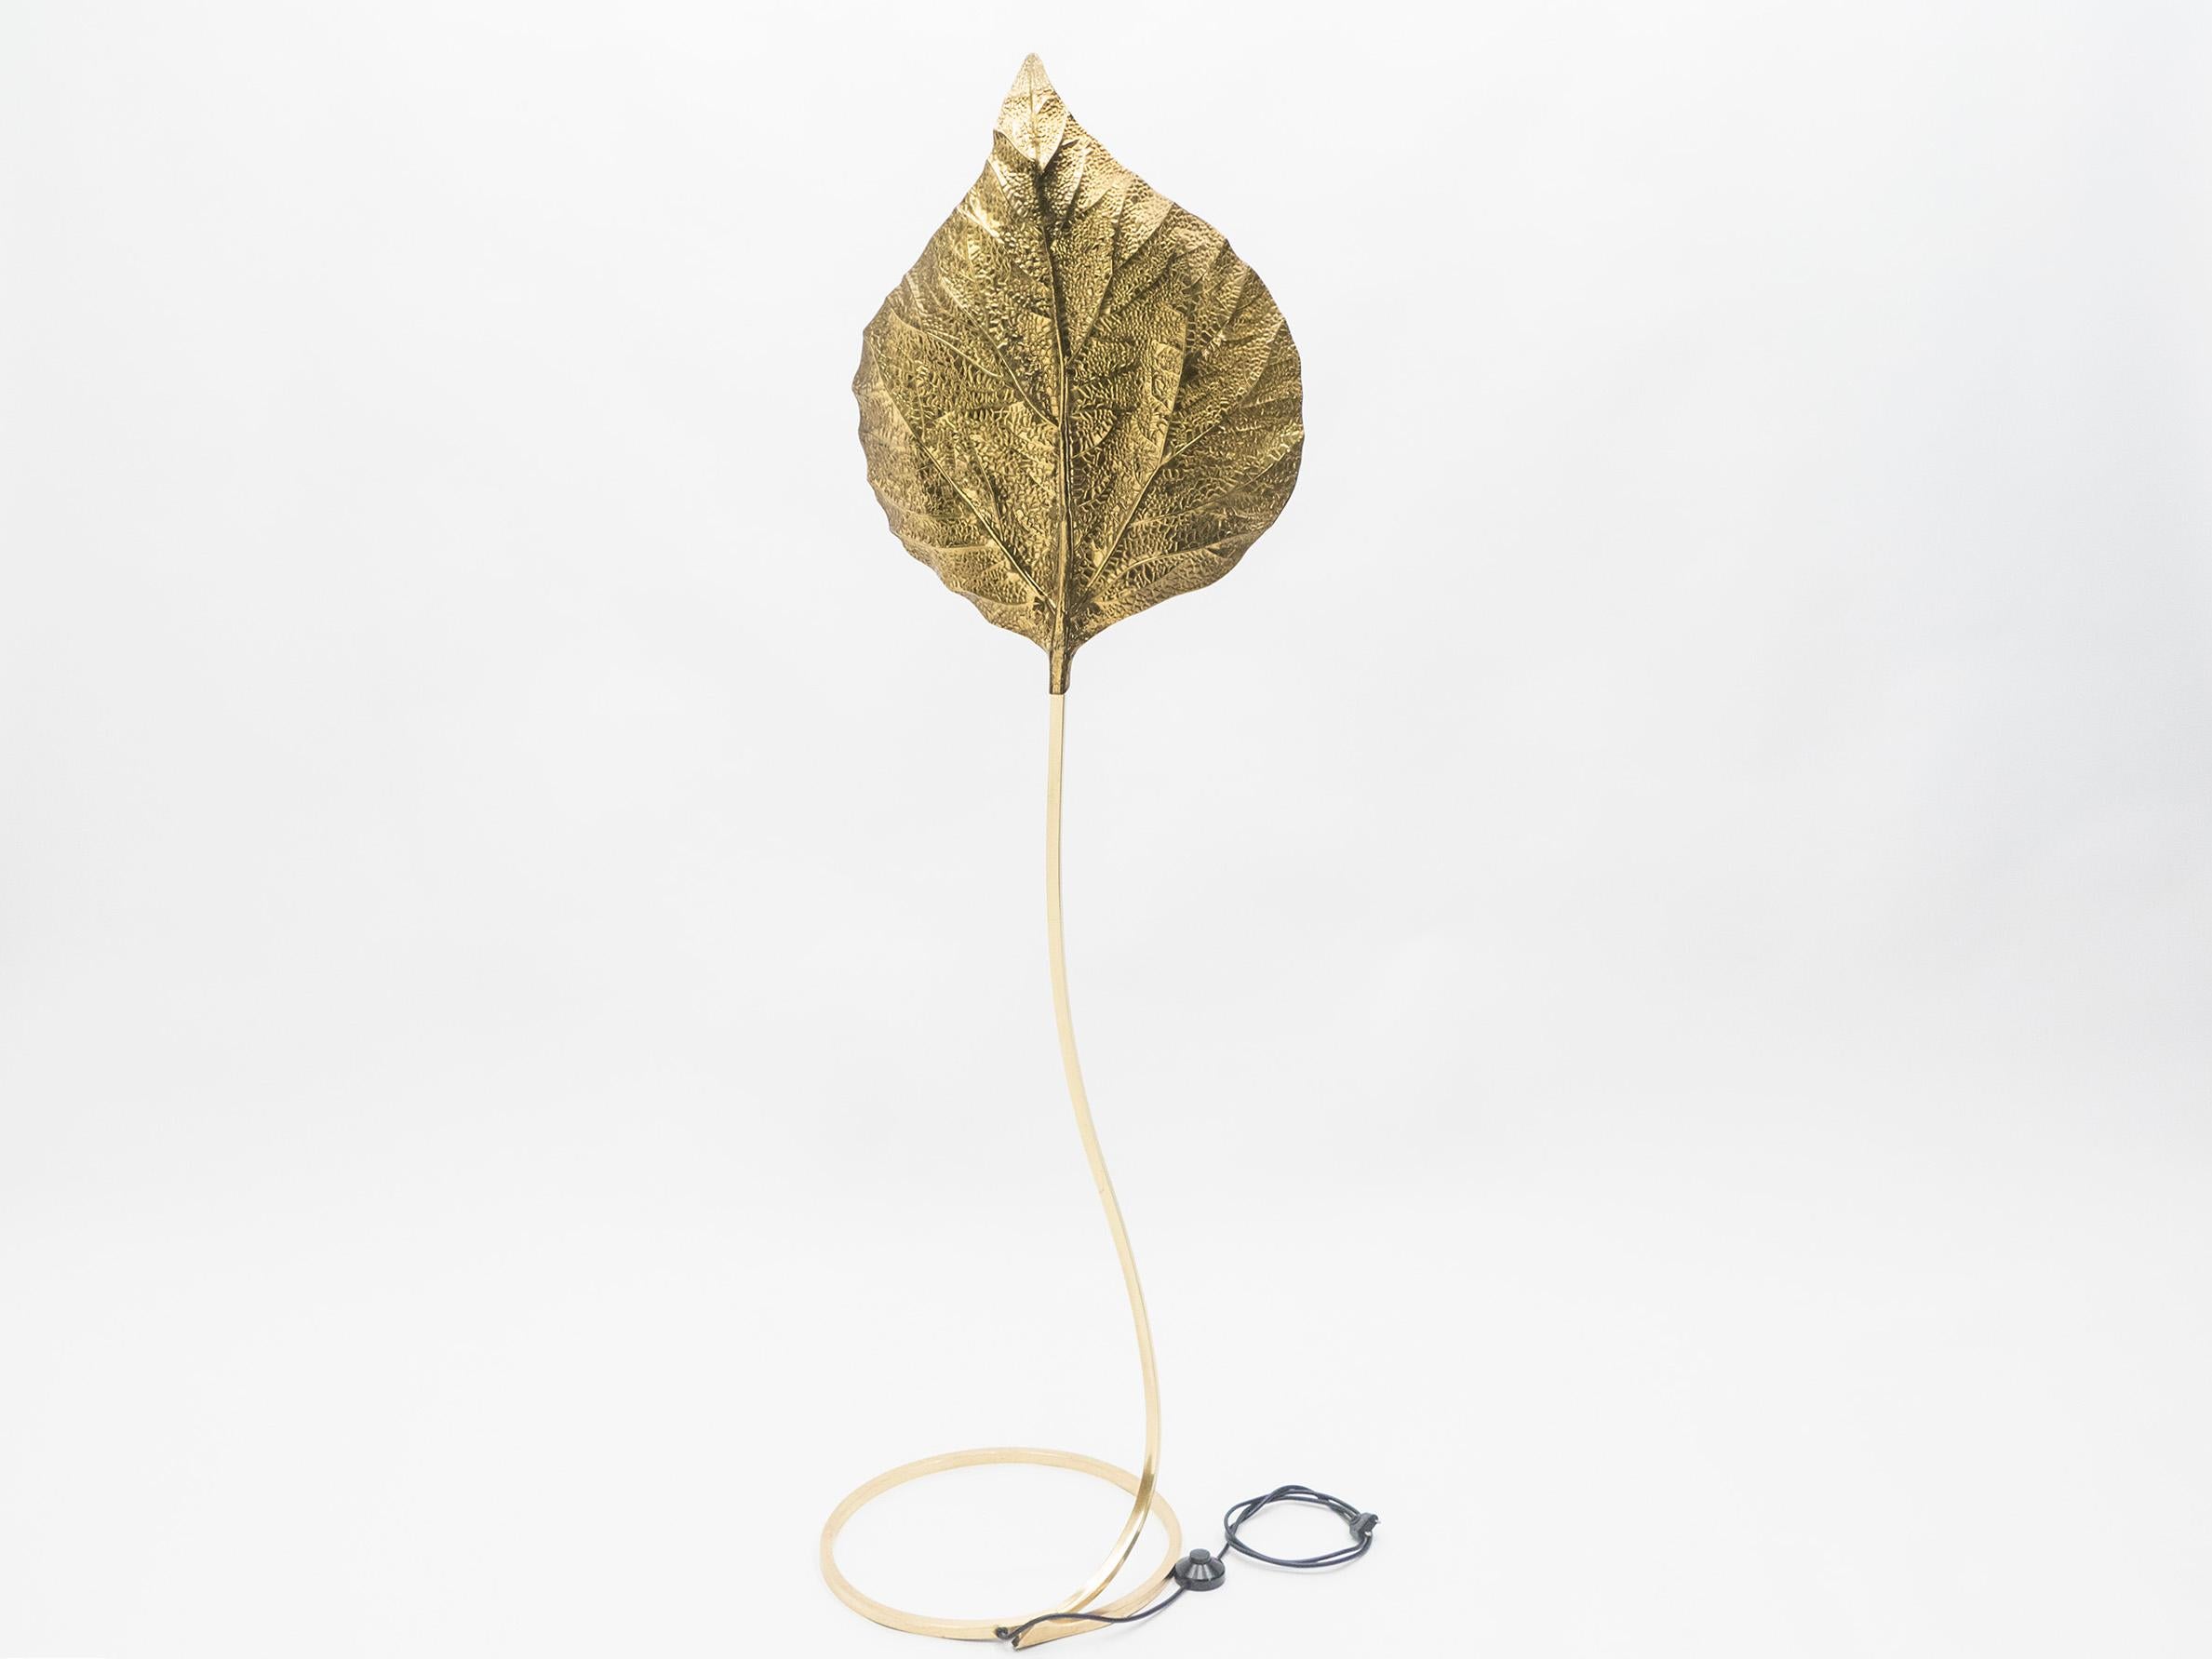 This iconic single leaf Rhubarb floor lamp by Tommaso Barbi was produced by Carlo Giorgi in Italy in the 1970s. The circular brass frame sweeps upwards from the base to support the large, decorative, hammered brass leaf. The handcrafted element